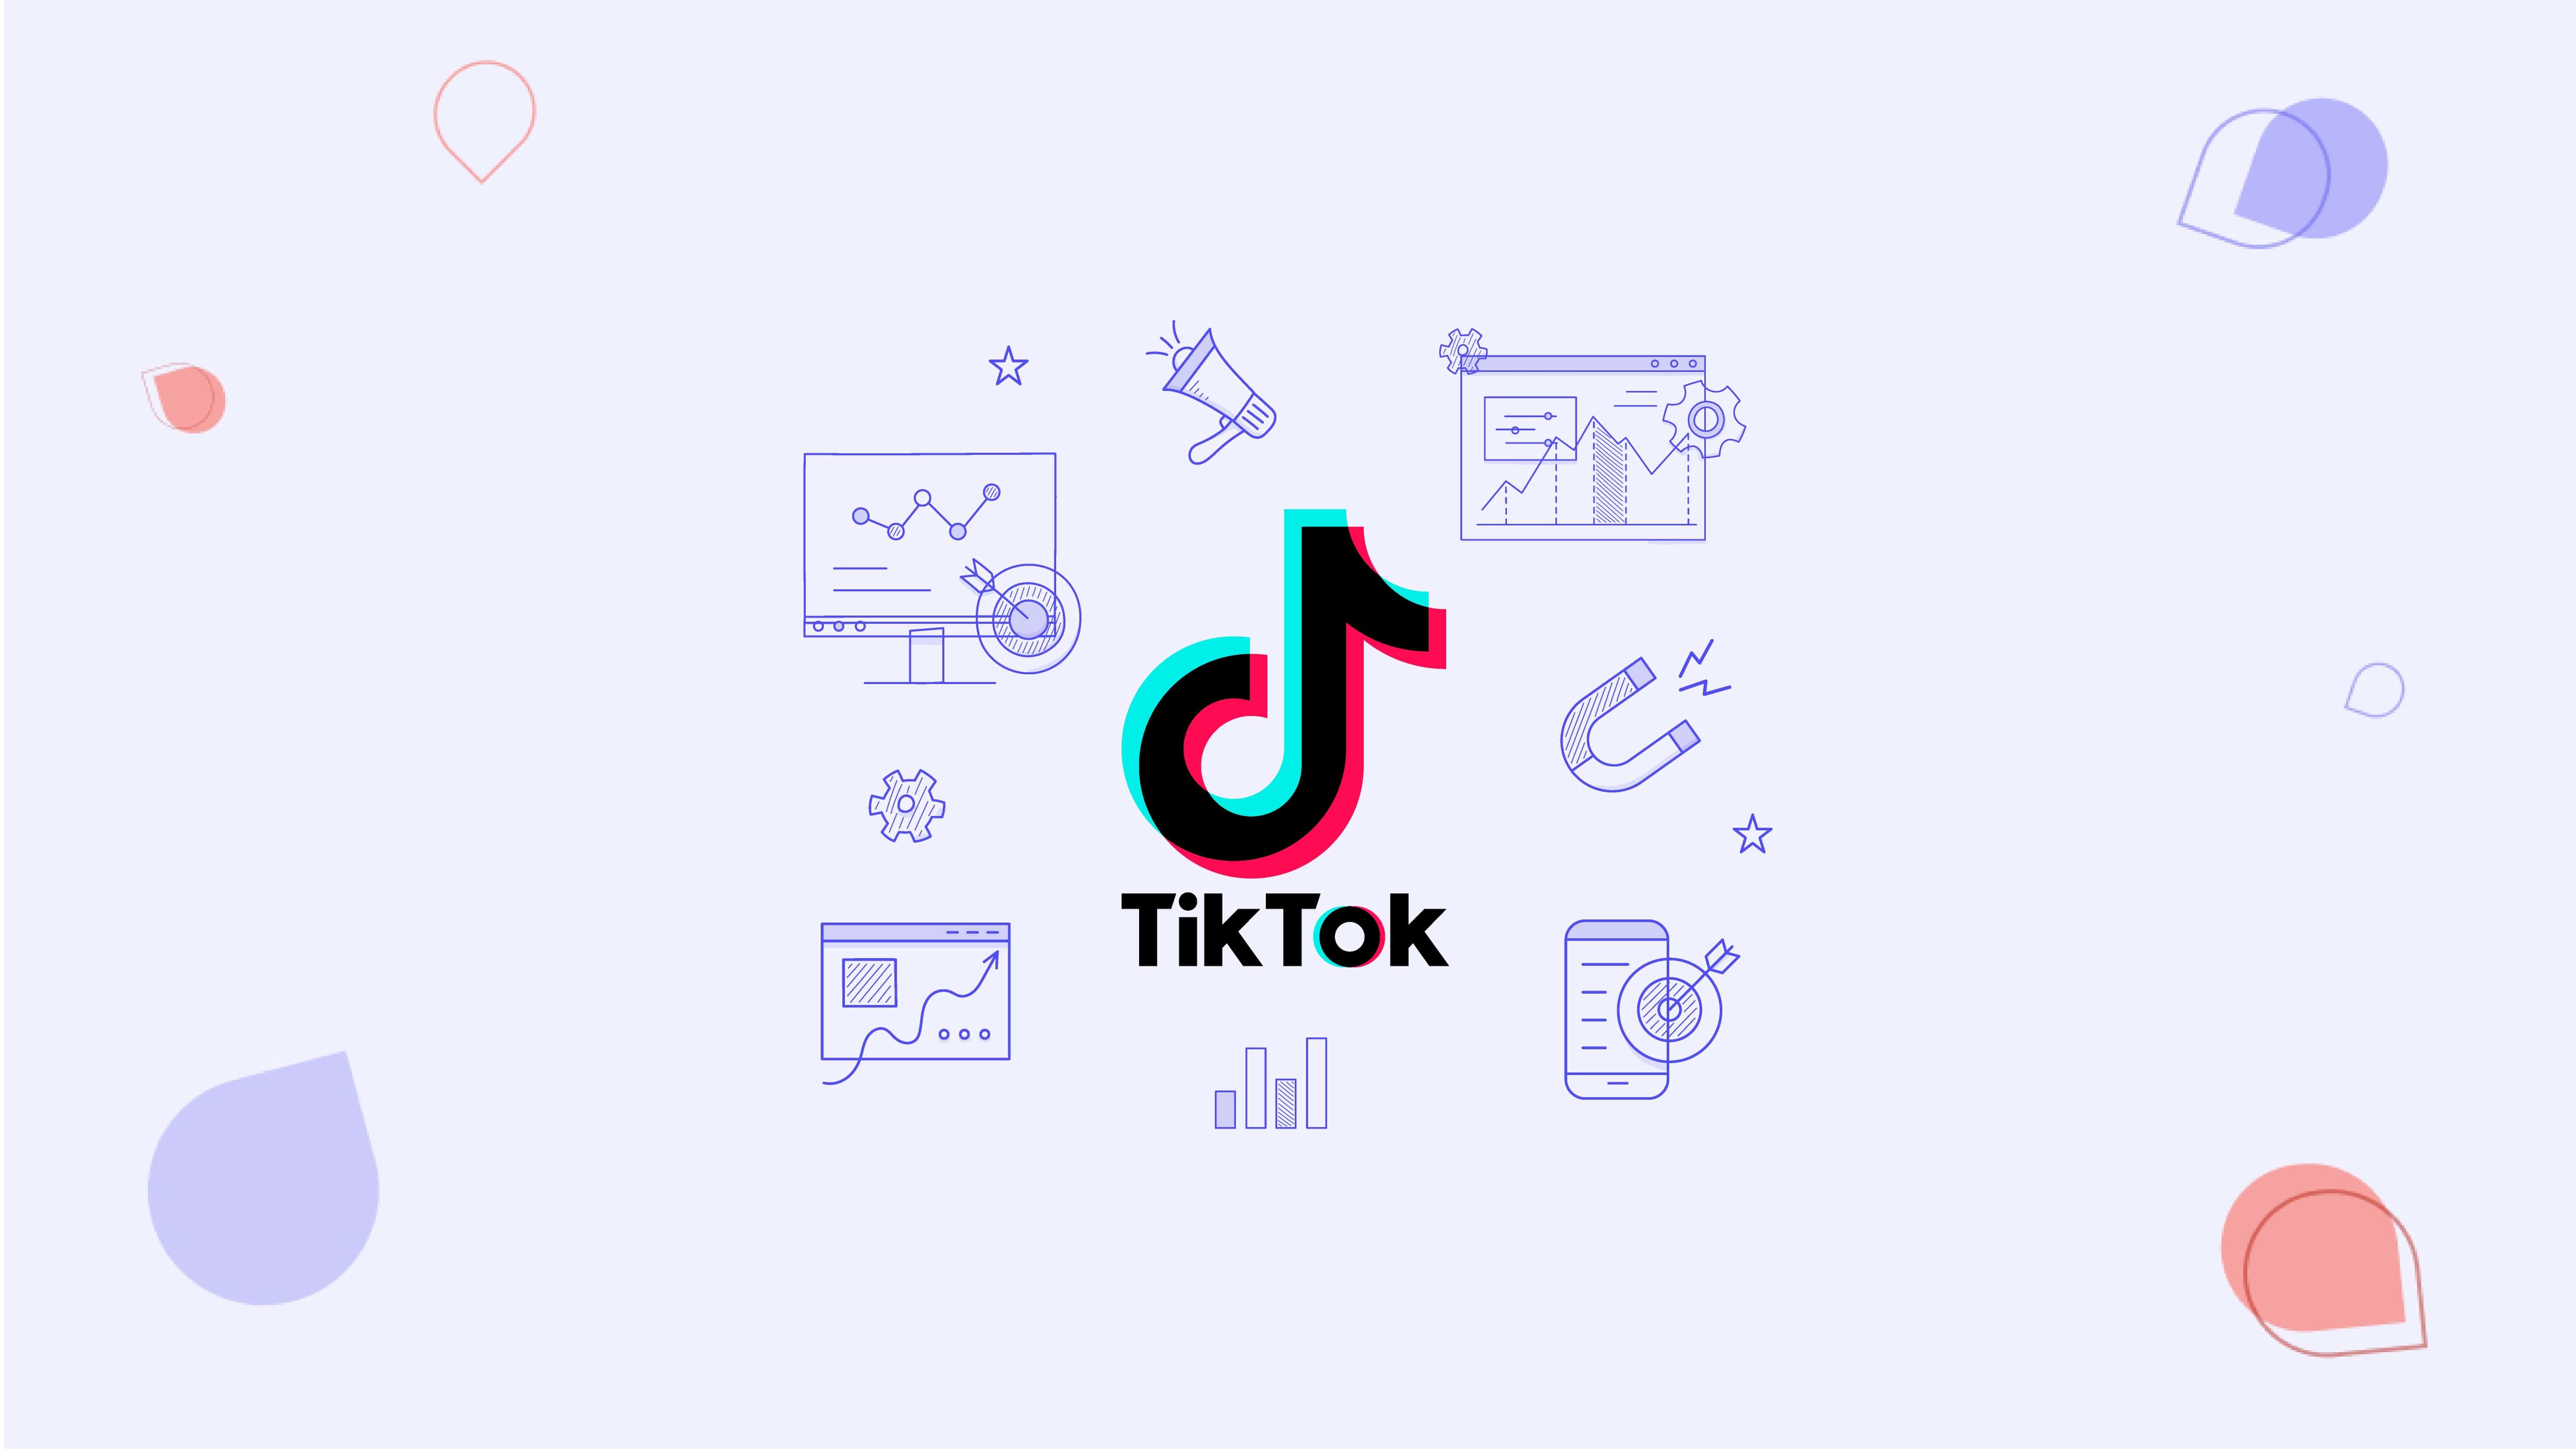 Is buying TikTok followers a good idea to grow my account quickly? - Quora